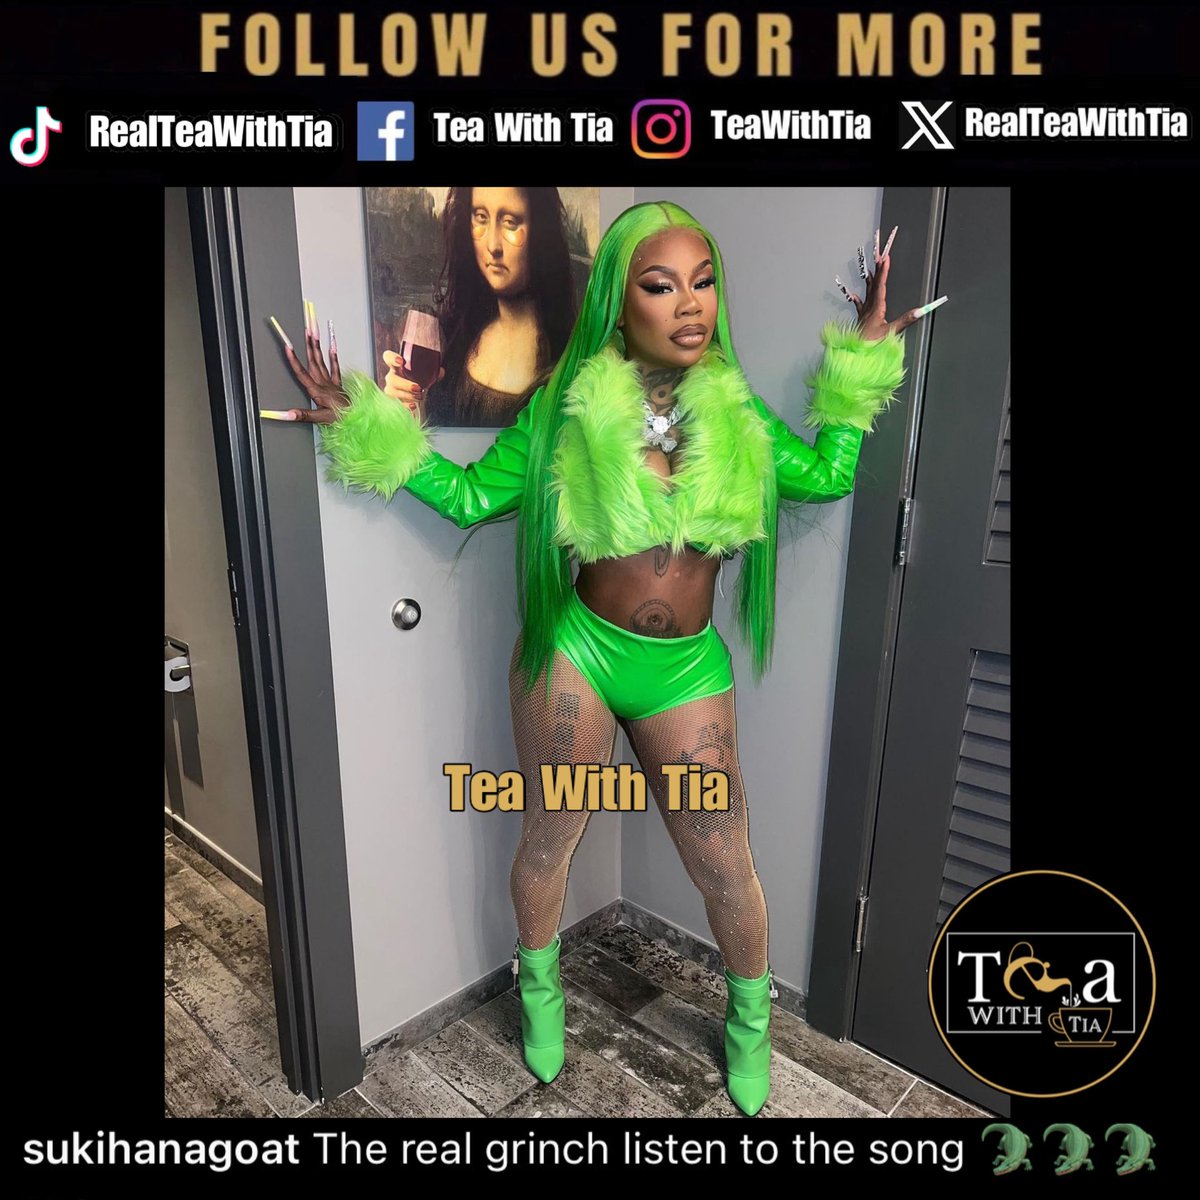 I’m screaming at this comment 🤣🤣🤣🤣. hollywoodunlocked posted celebrity #Halloween costumes and they posted #Sukhiana because they thought she was the grinch…..chileeee 😩

Suki left a comment letting them know it wasn’t a costume. @sukihanagoat was just promoting her song